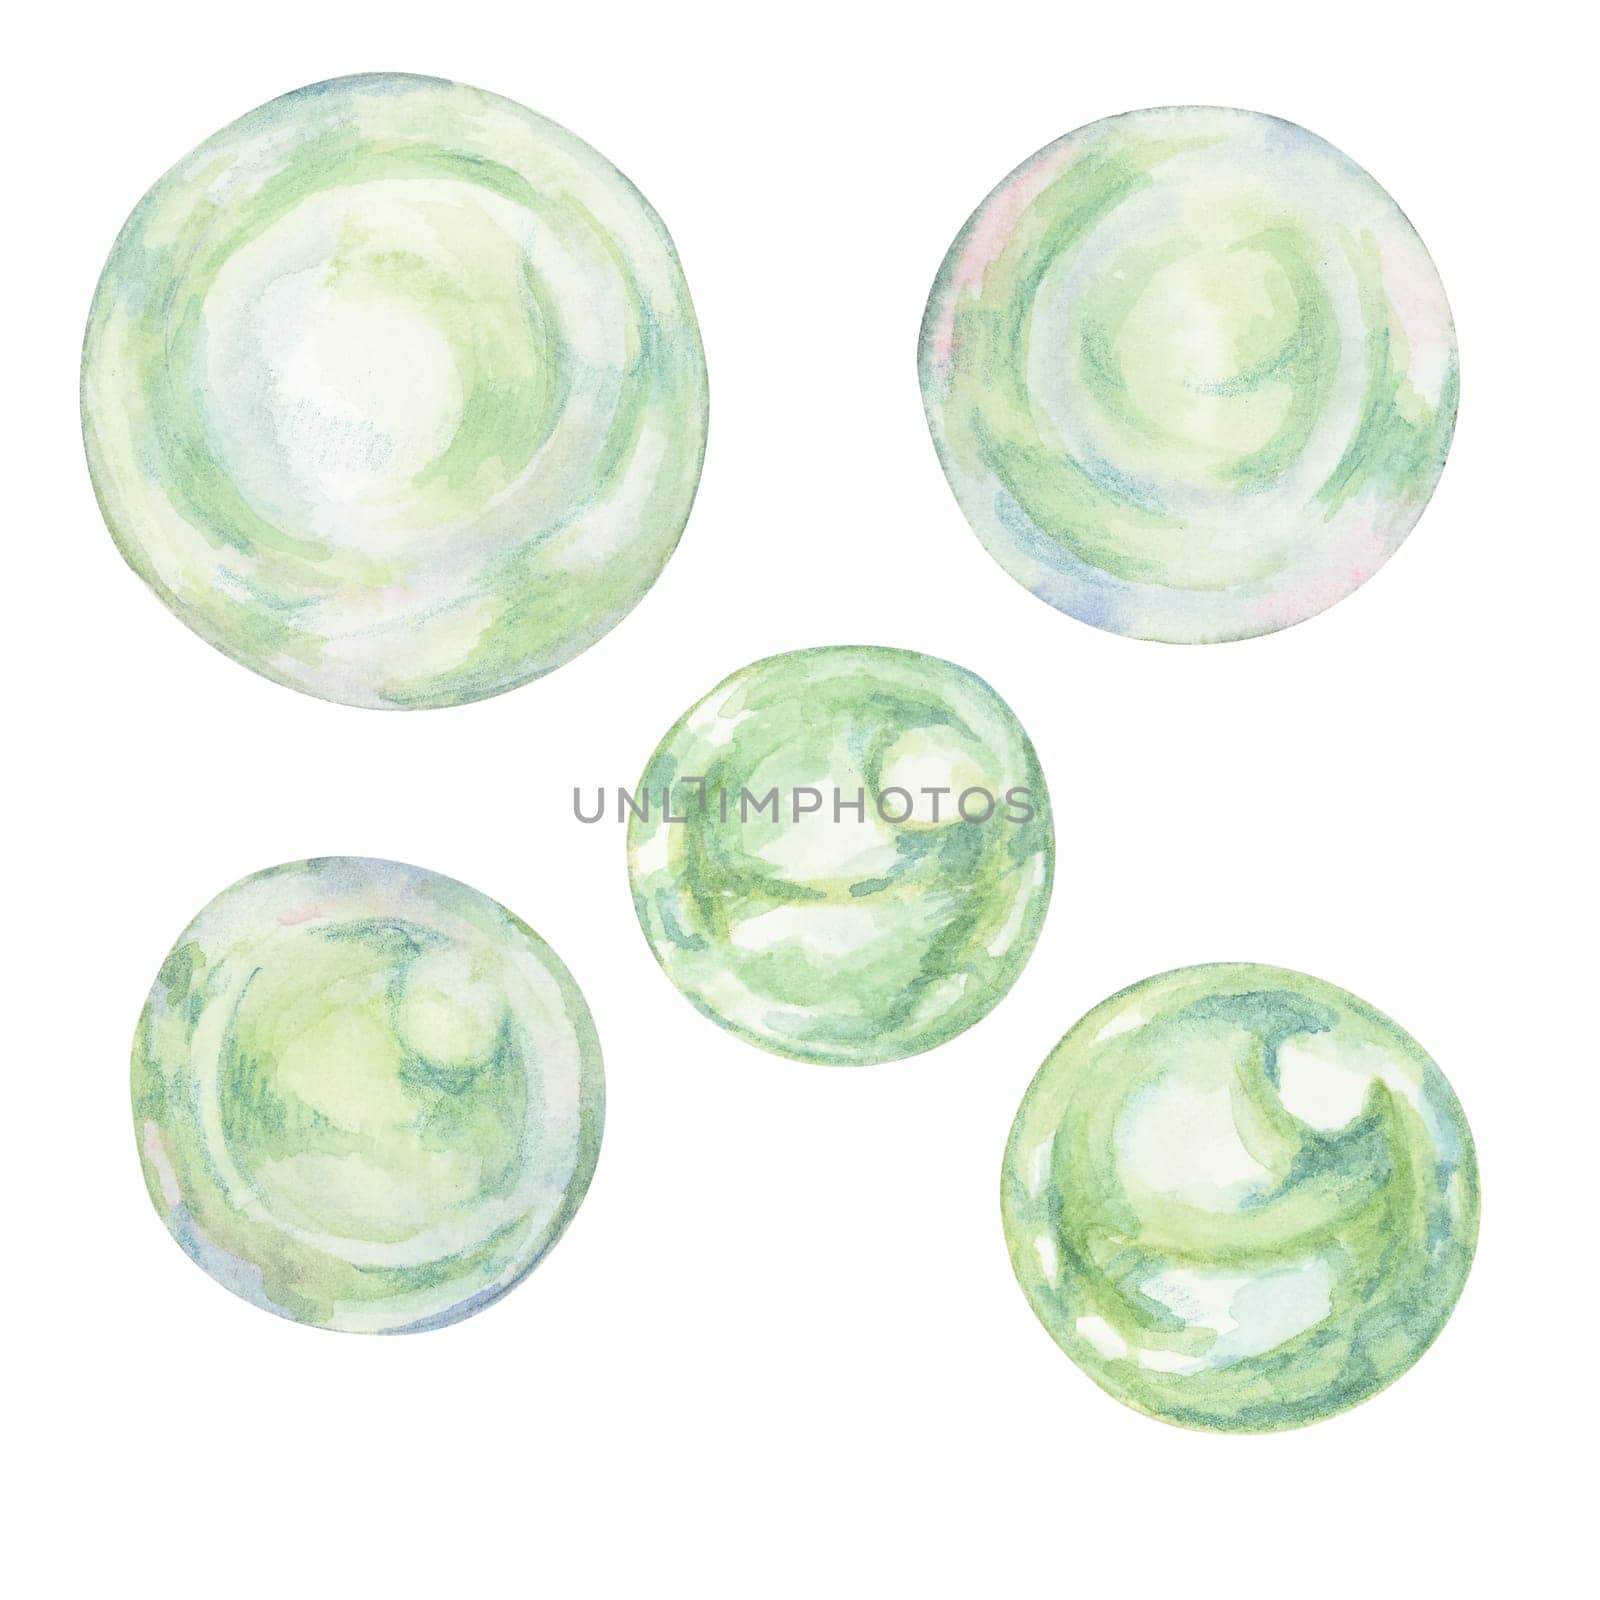 Green watercolor bubbles. Clipart of rainbow reflecting spheres in pale color. Hand drawn illustration for postcards, soap, science, chemistry theme by Fofito